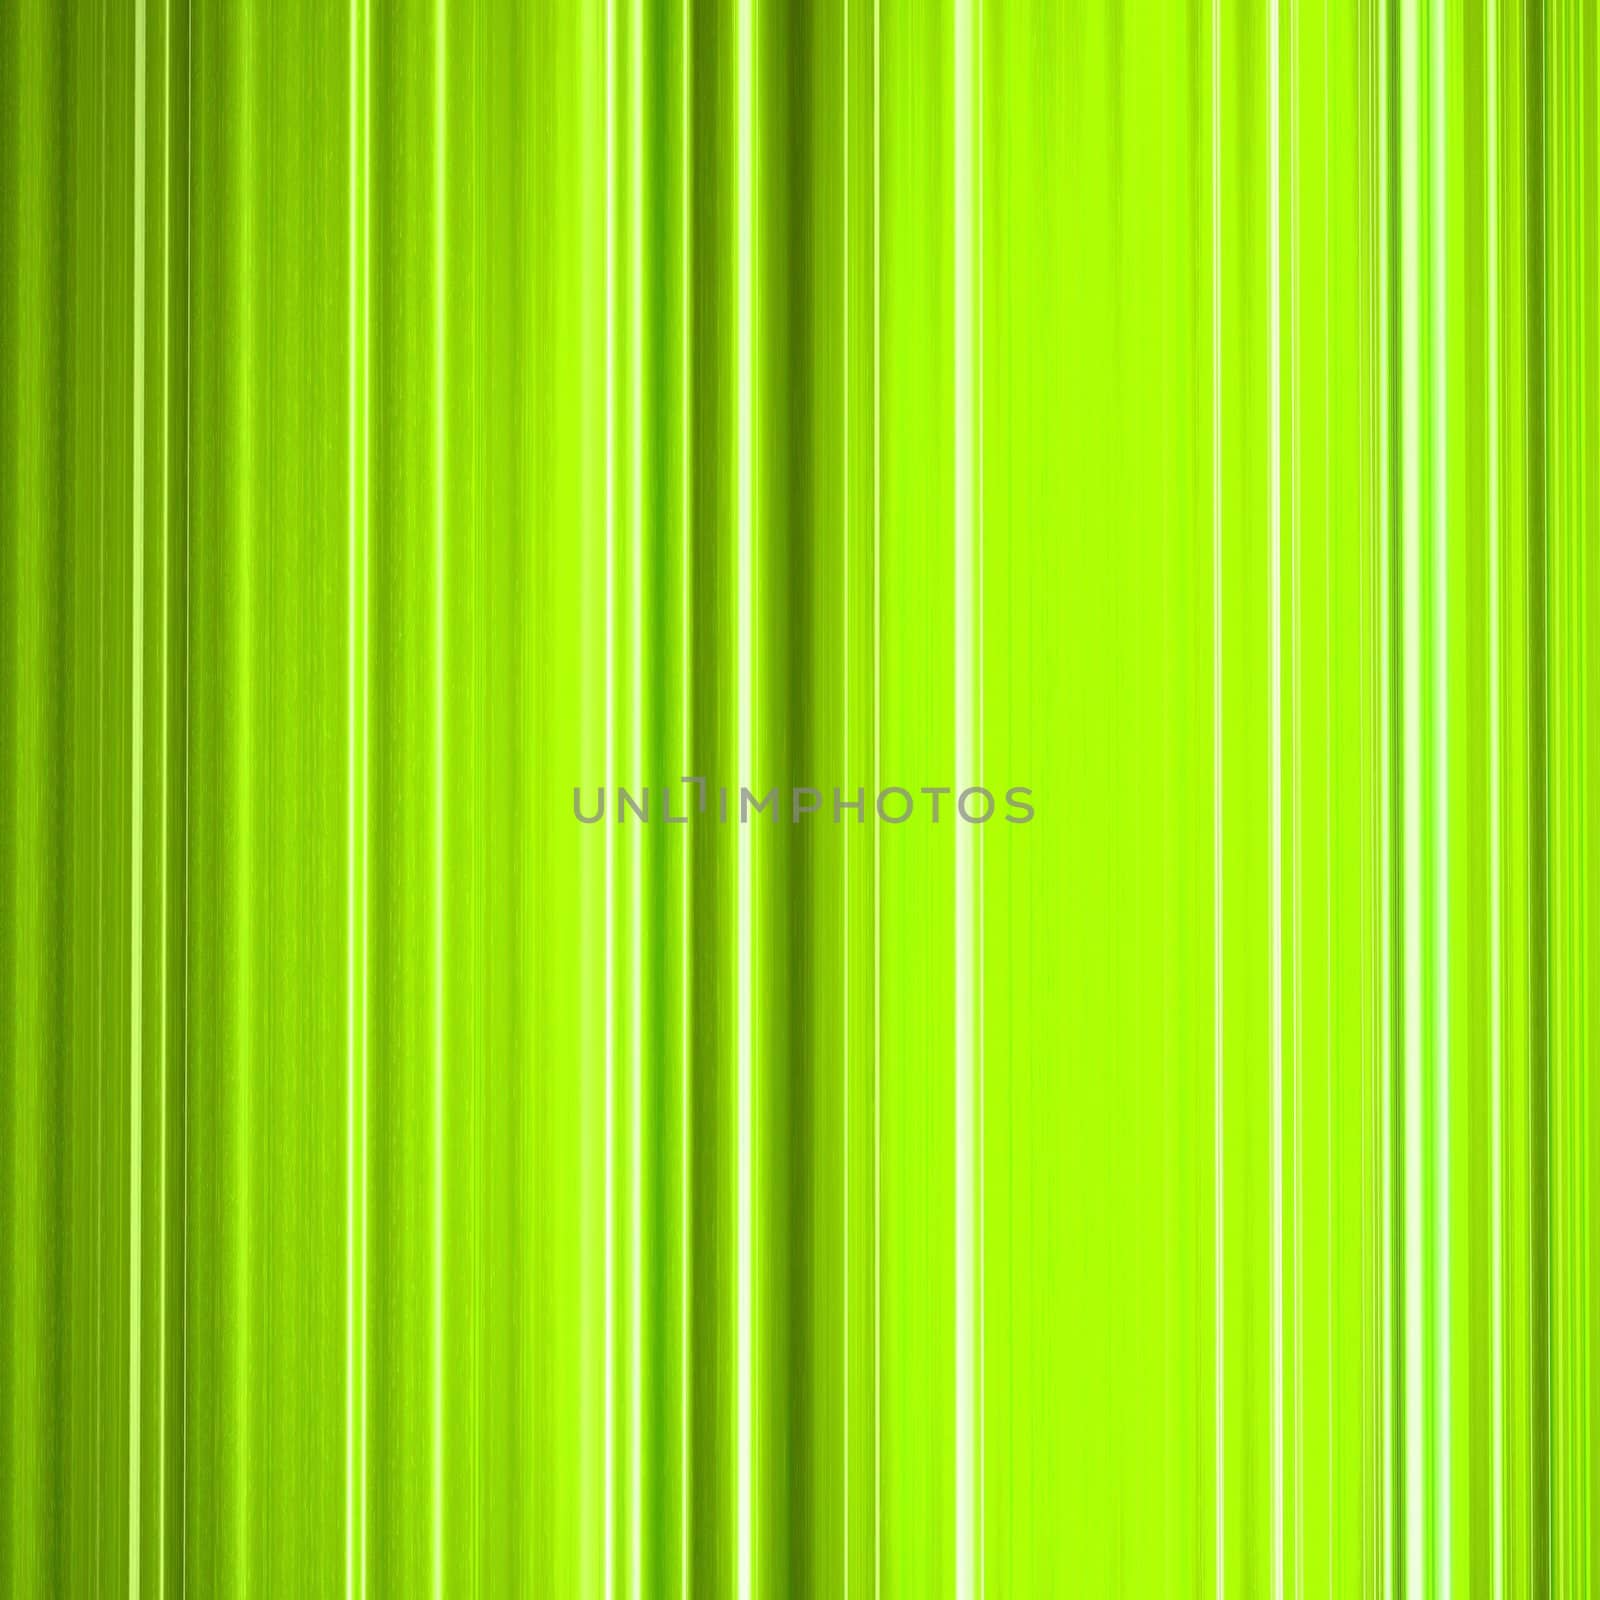 A background illustration of lime green vertical lines.